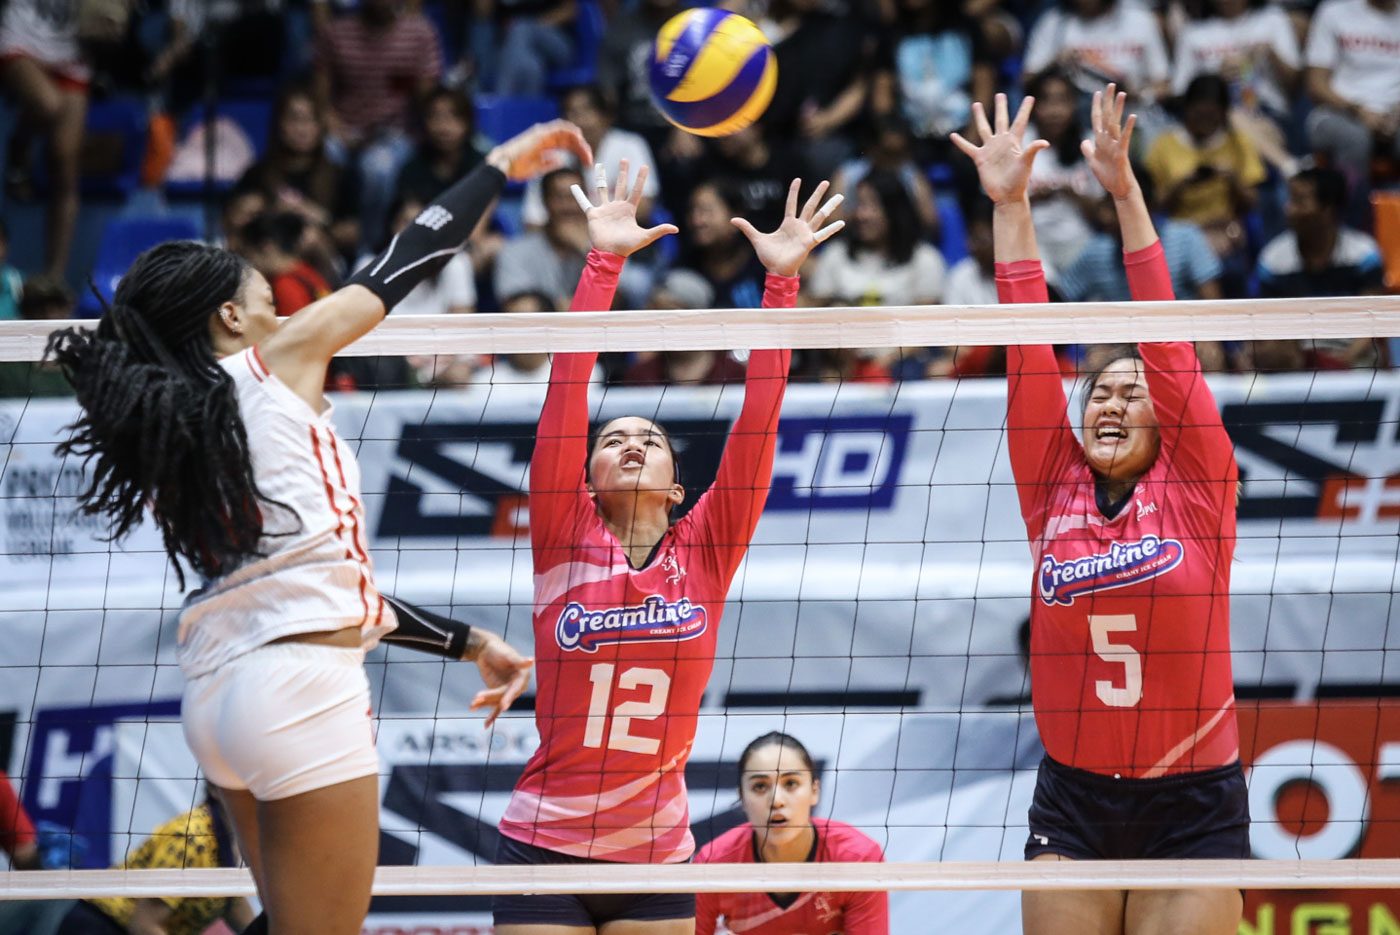 Creamline snaps PetroGazz’s perfect run for share of PVL lead